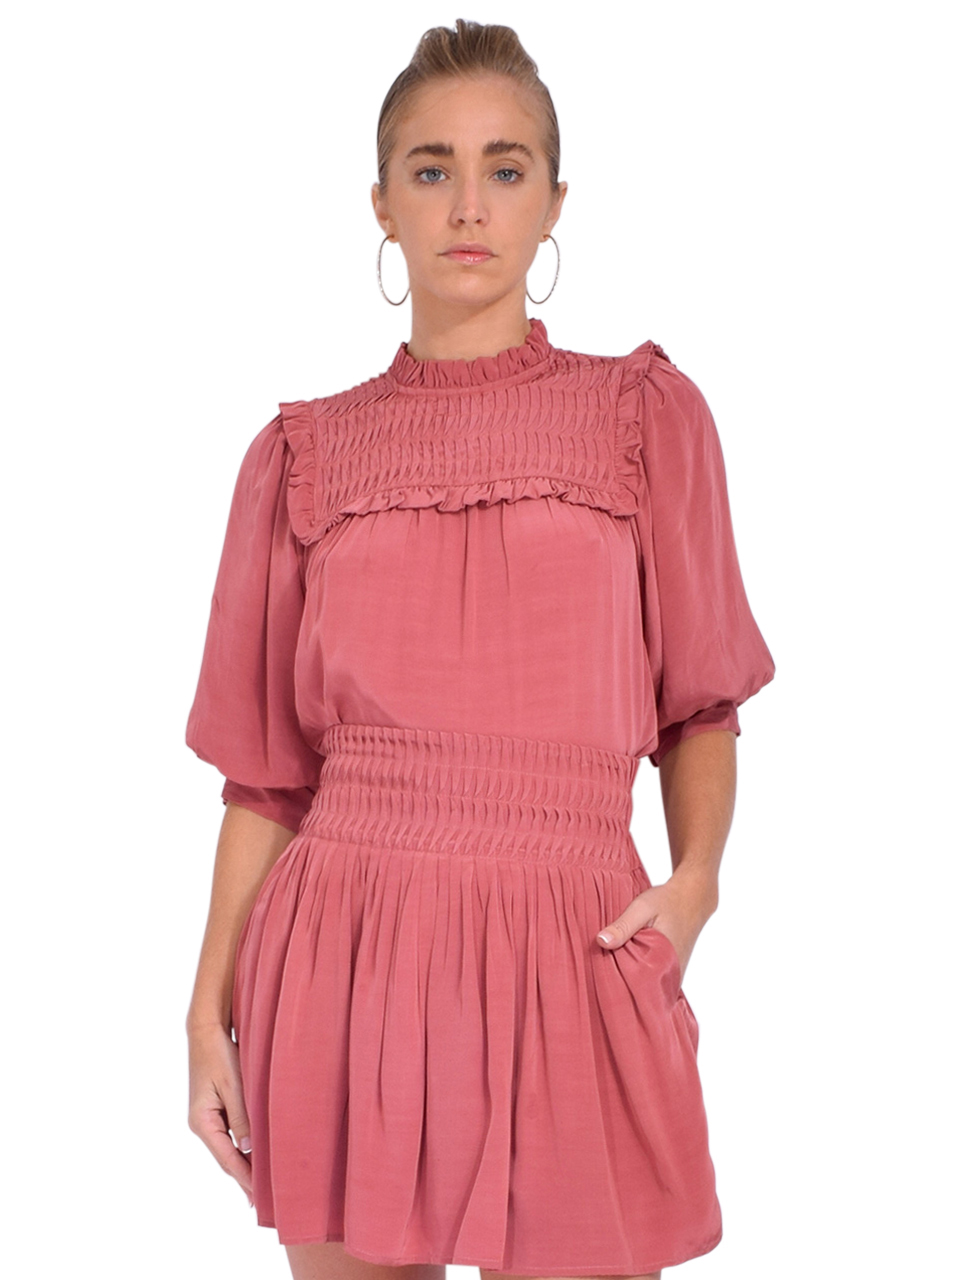 MAGALI PASCAL Cassia Top in Dusty Rose Front View 